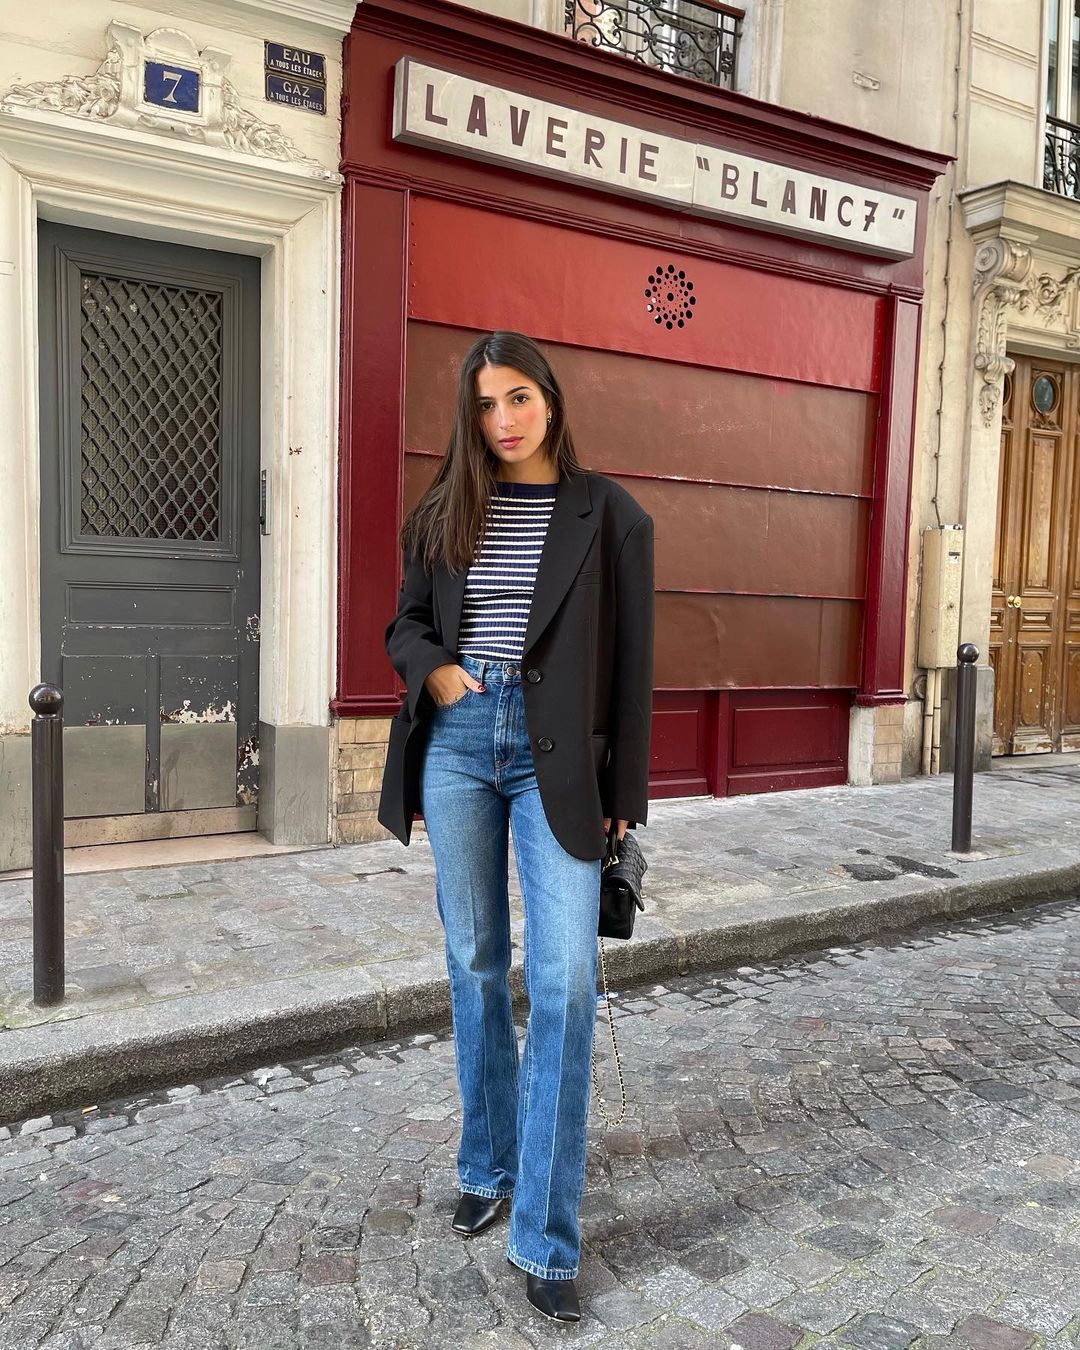 French Fashion Essentials: @tamaramory wears a pair of flared jeans with a black blazer and Breton stripe tee